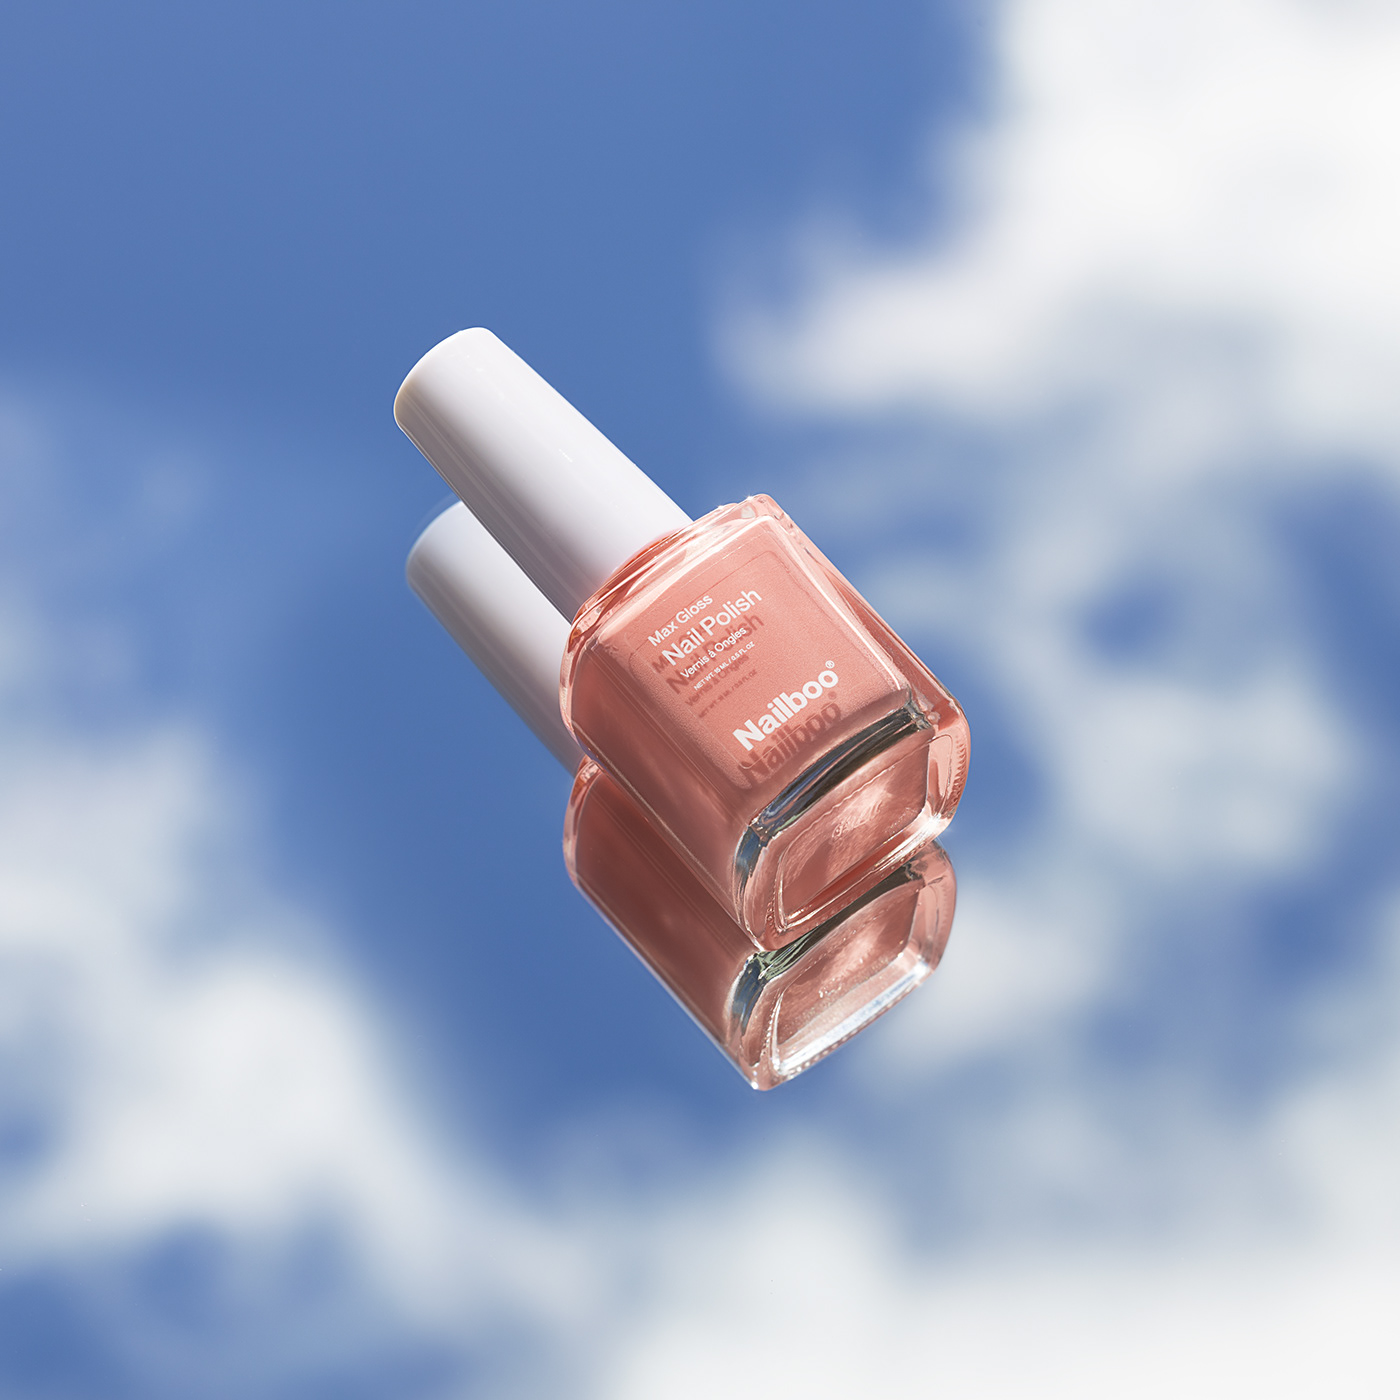 nail polish on the background of the spring sky with clouds